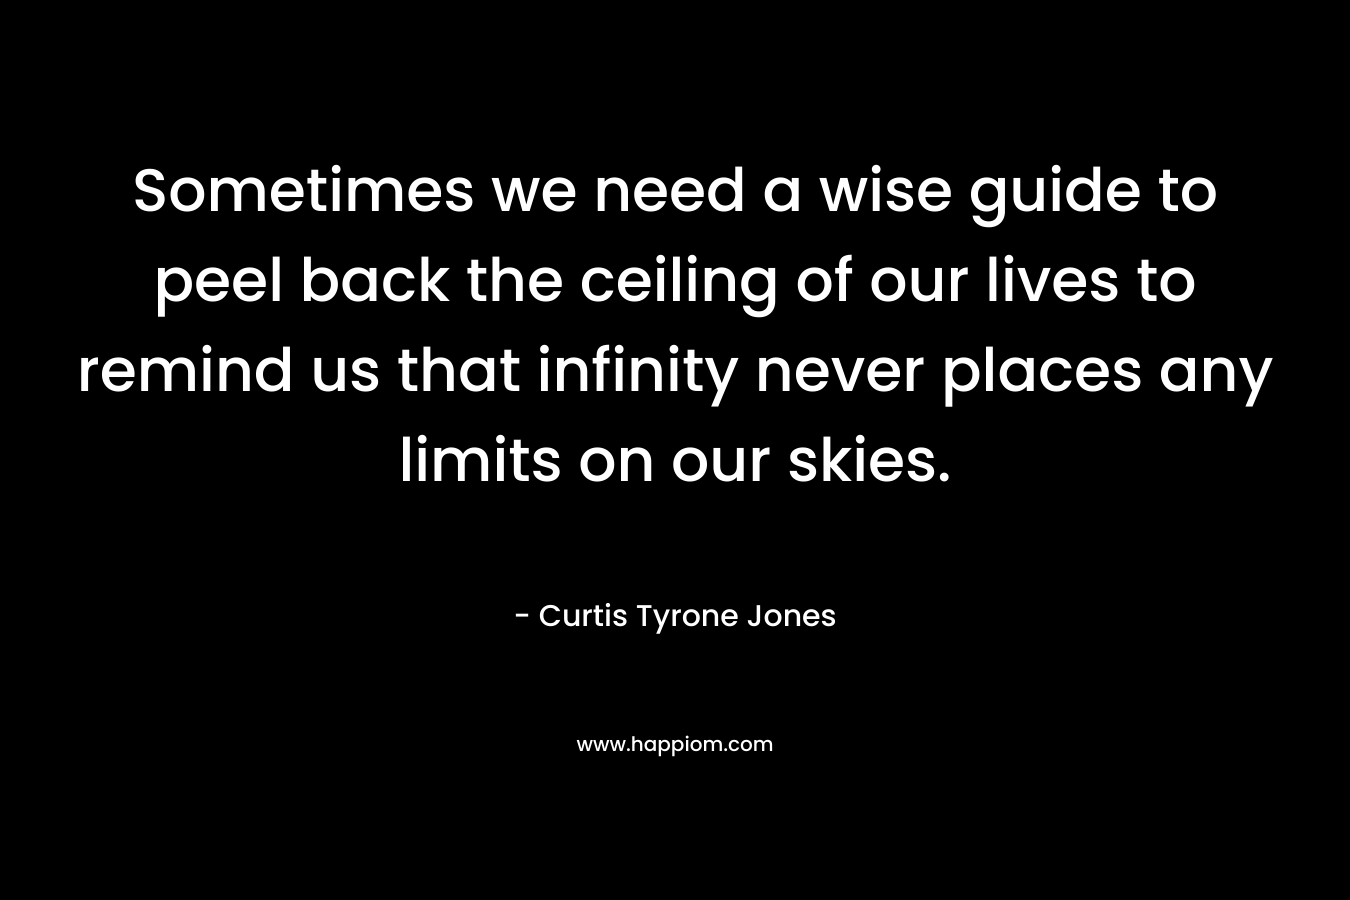 Sometimes we need a wise guide to peel back the ceiling of our lives to remind us that infinity never places any limits on our skies.